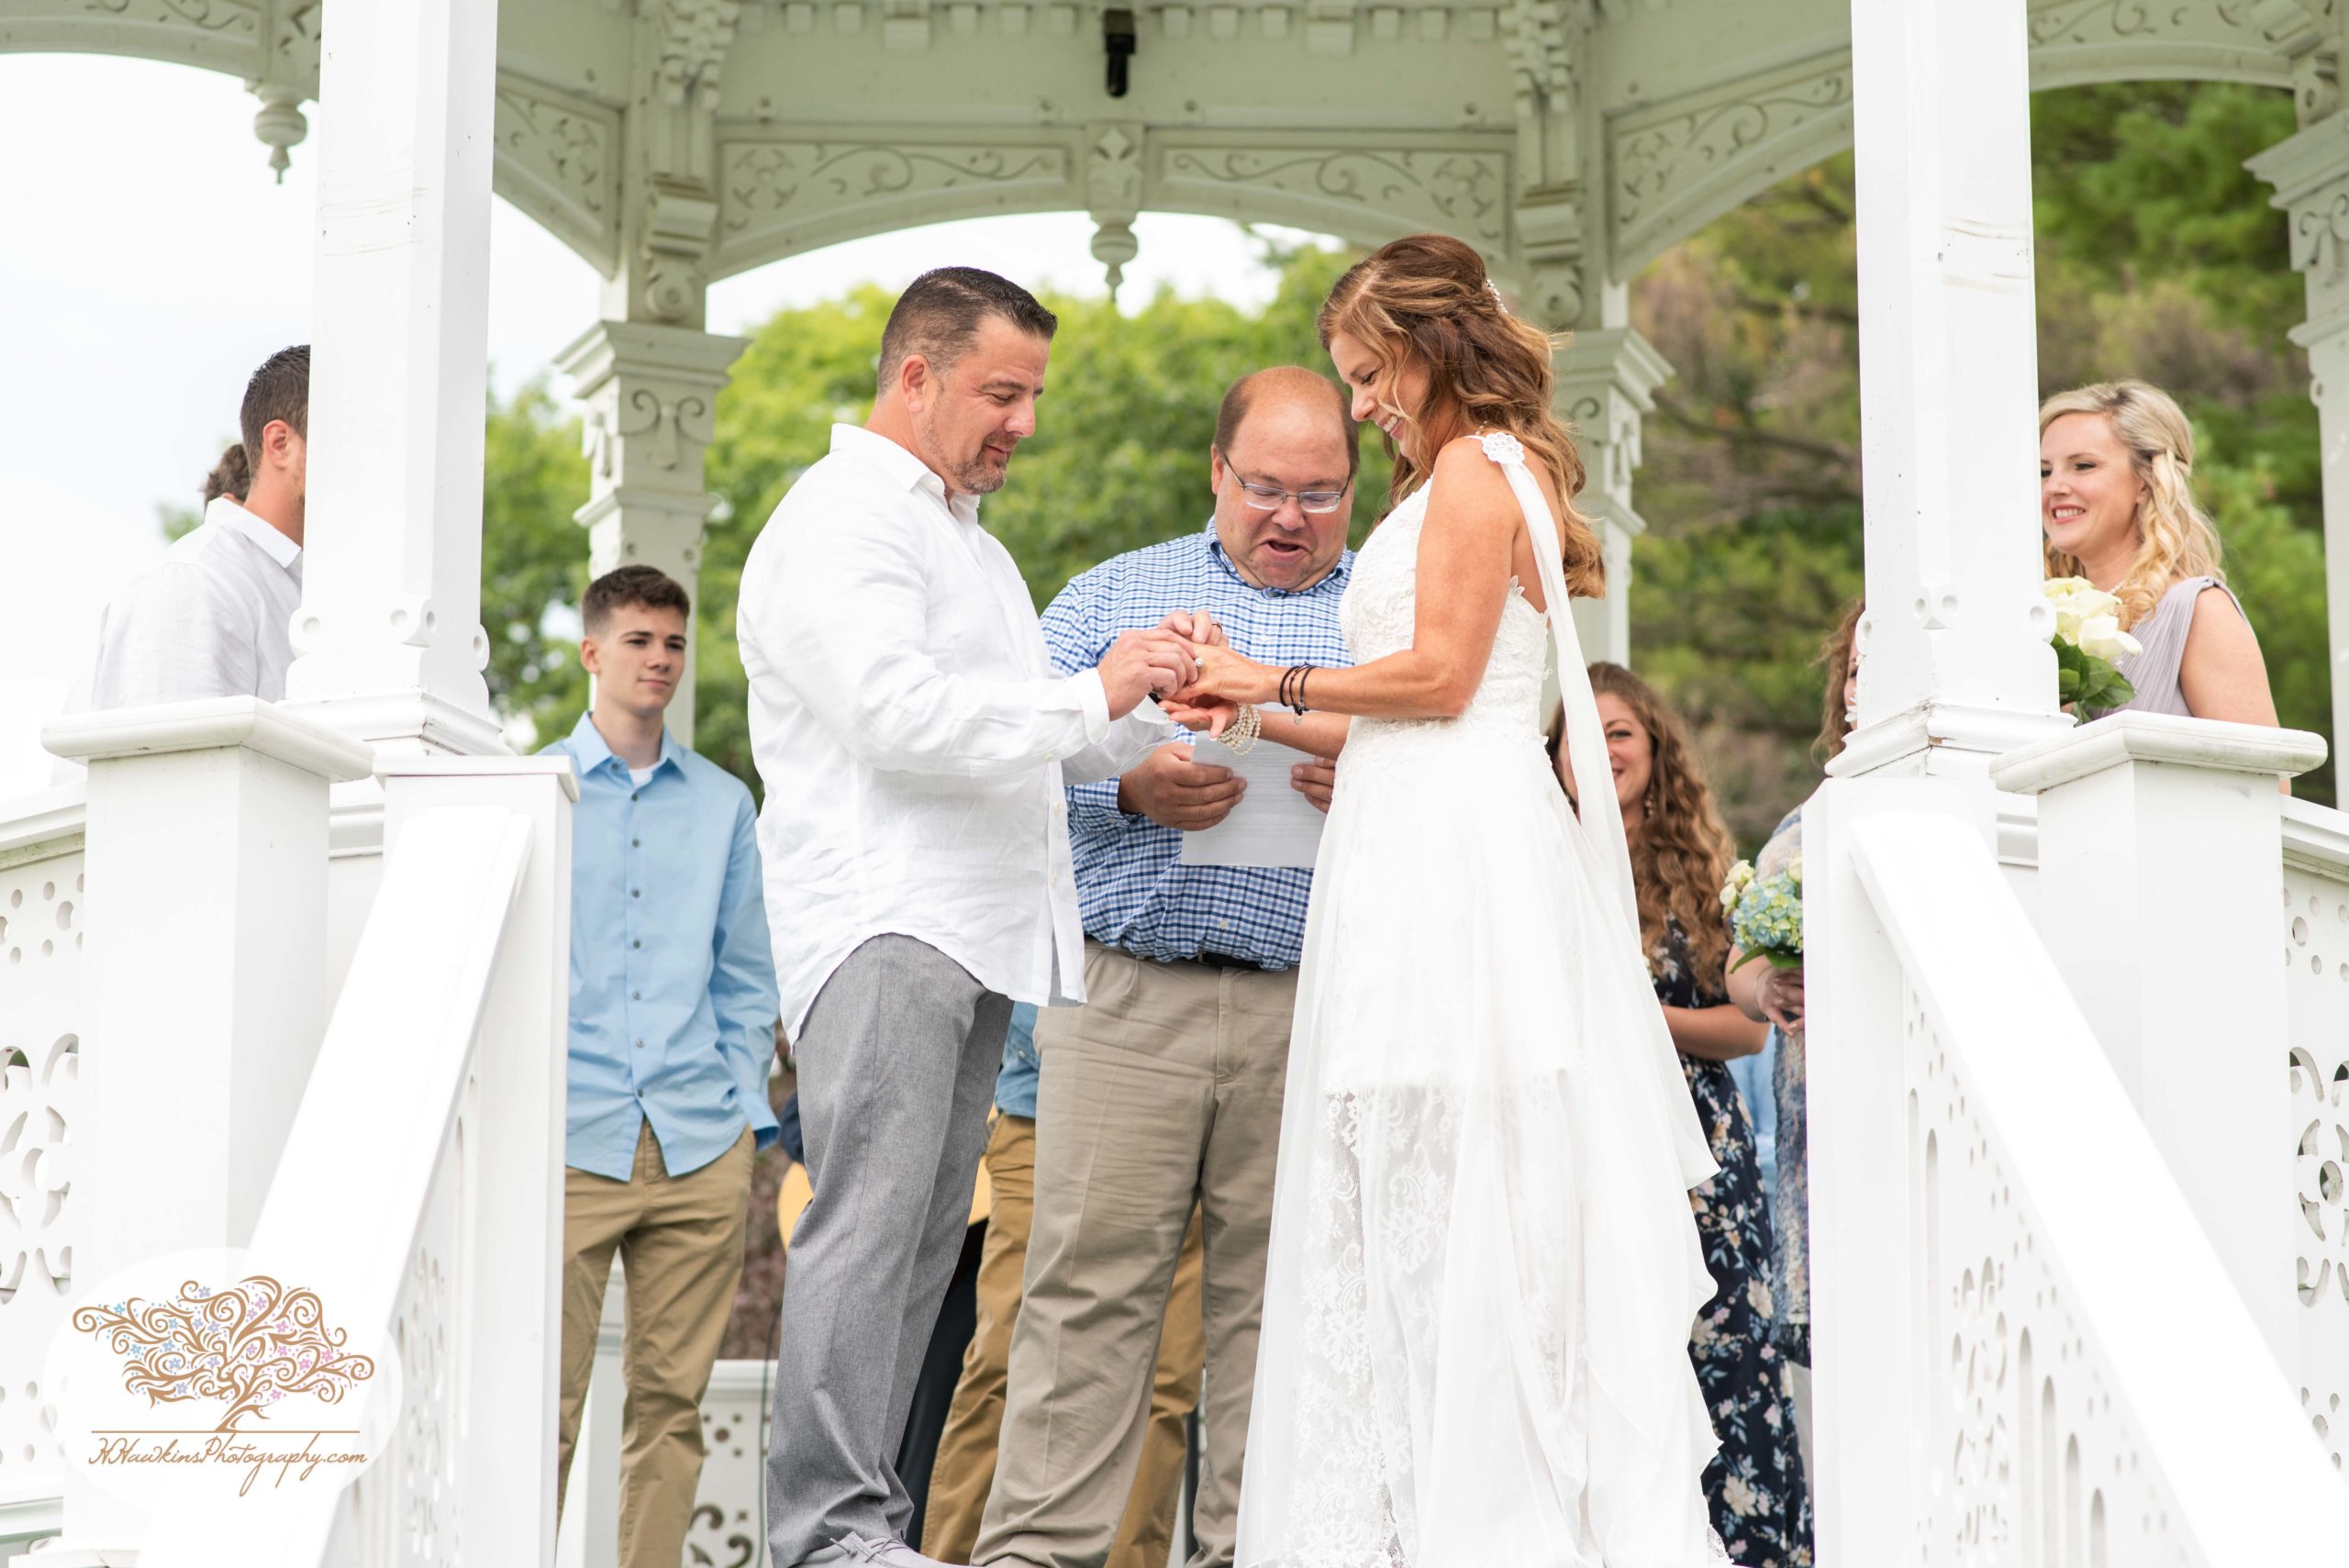 Bride and groom exchange rings in fingerlakes wedding ceremony at gazebo Bride's sons escort her down the aisle at Fingerlakes Wedding at Hoopes Park Auburn NY